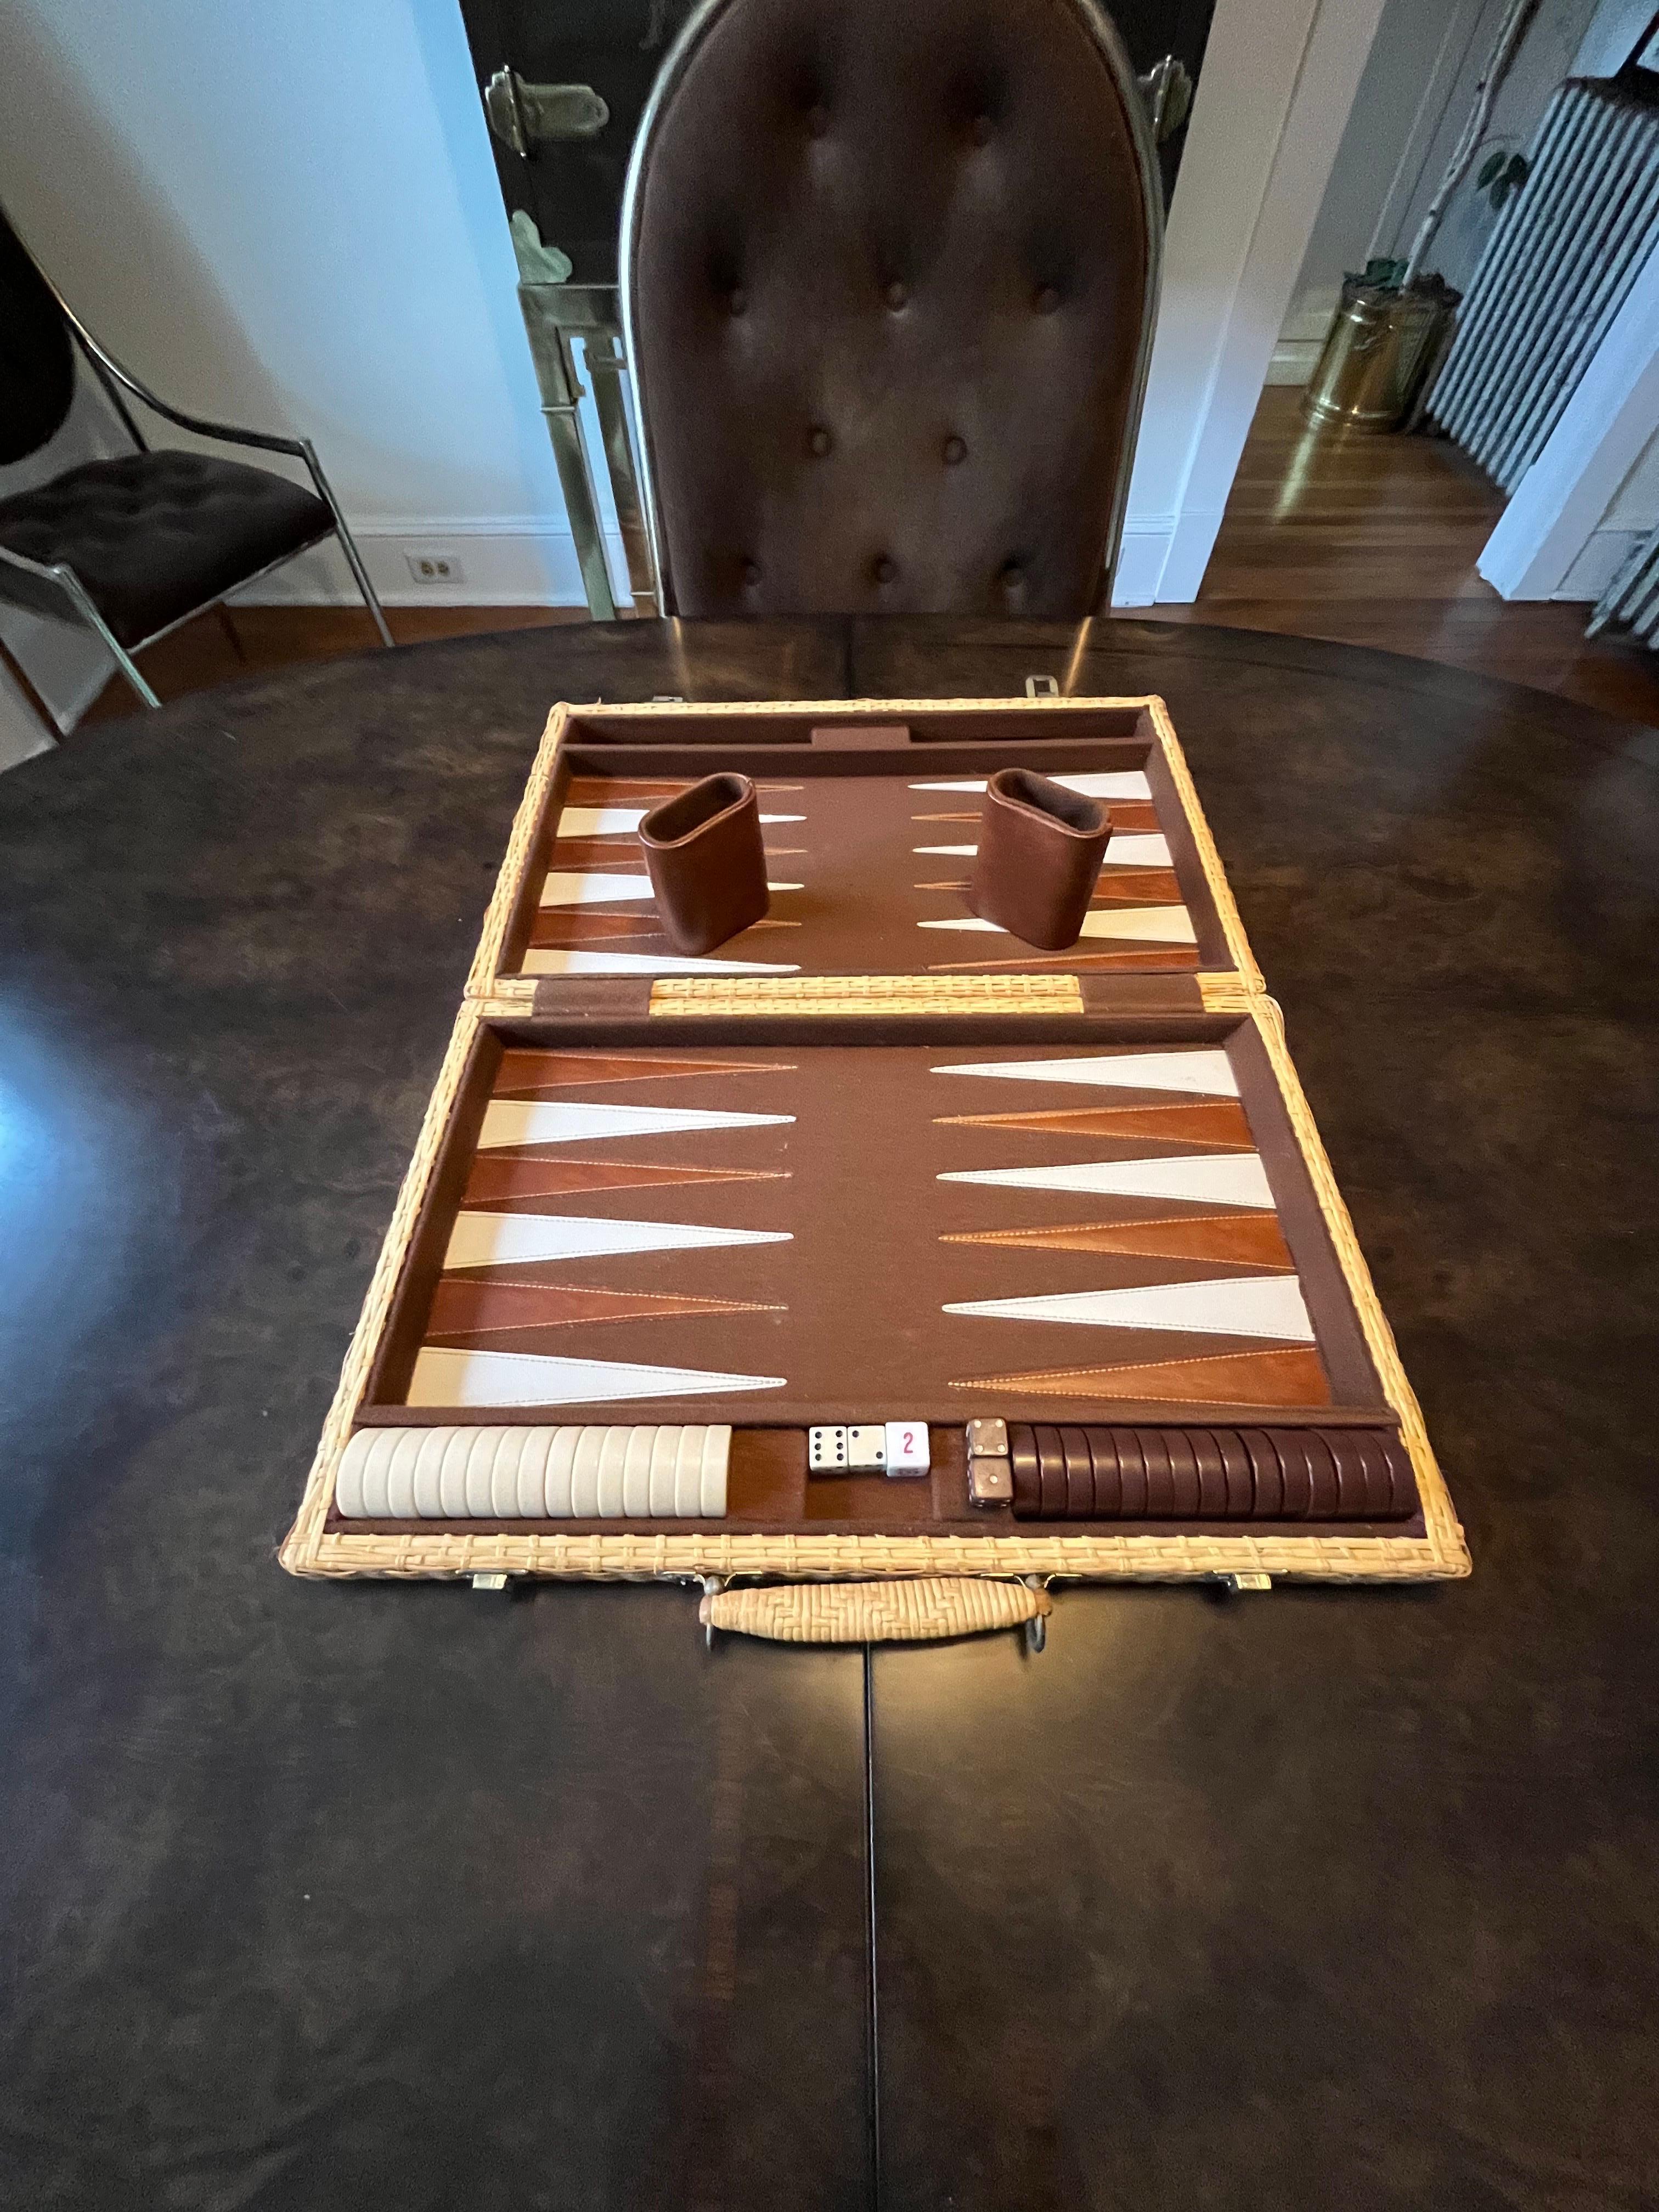 Beautiful wicker portable backgammon board. Brass hardware and wooden frame completely wrapped in wicker. Brown felt interior and brown and cream triangles for gameplay. Board includes all brown and cream chips, 2 brown and 2 white dice as well as a